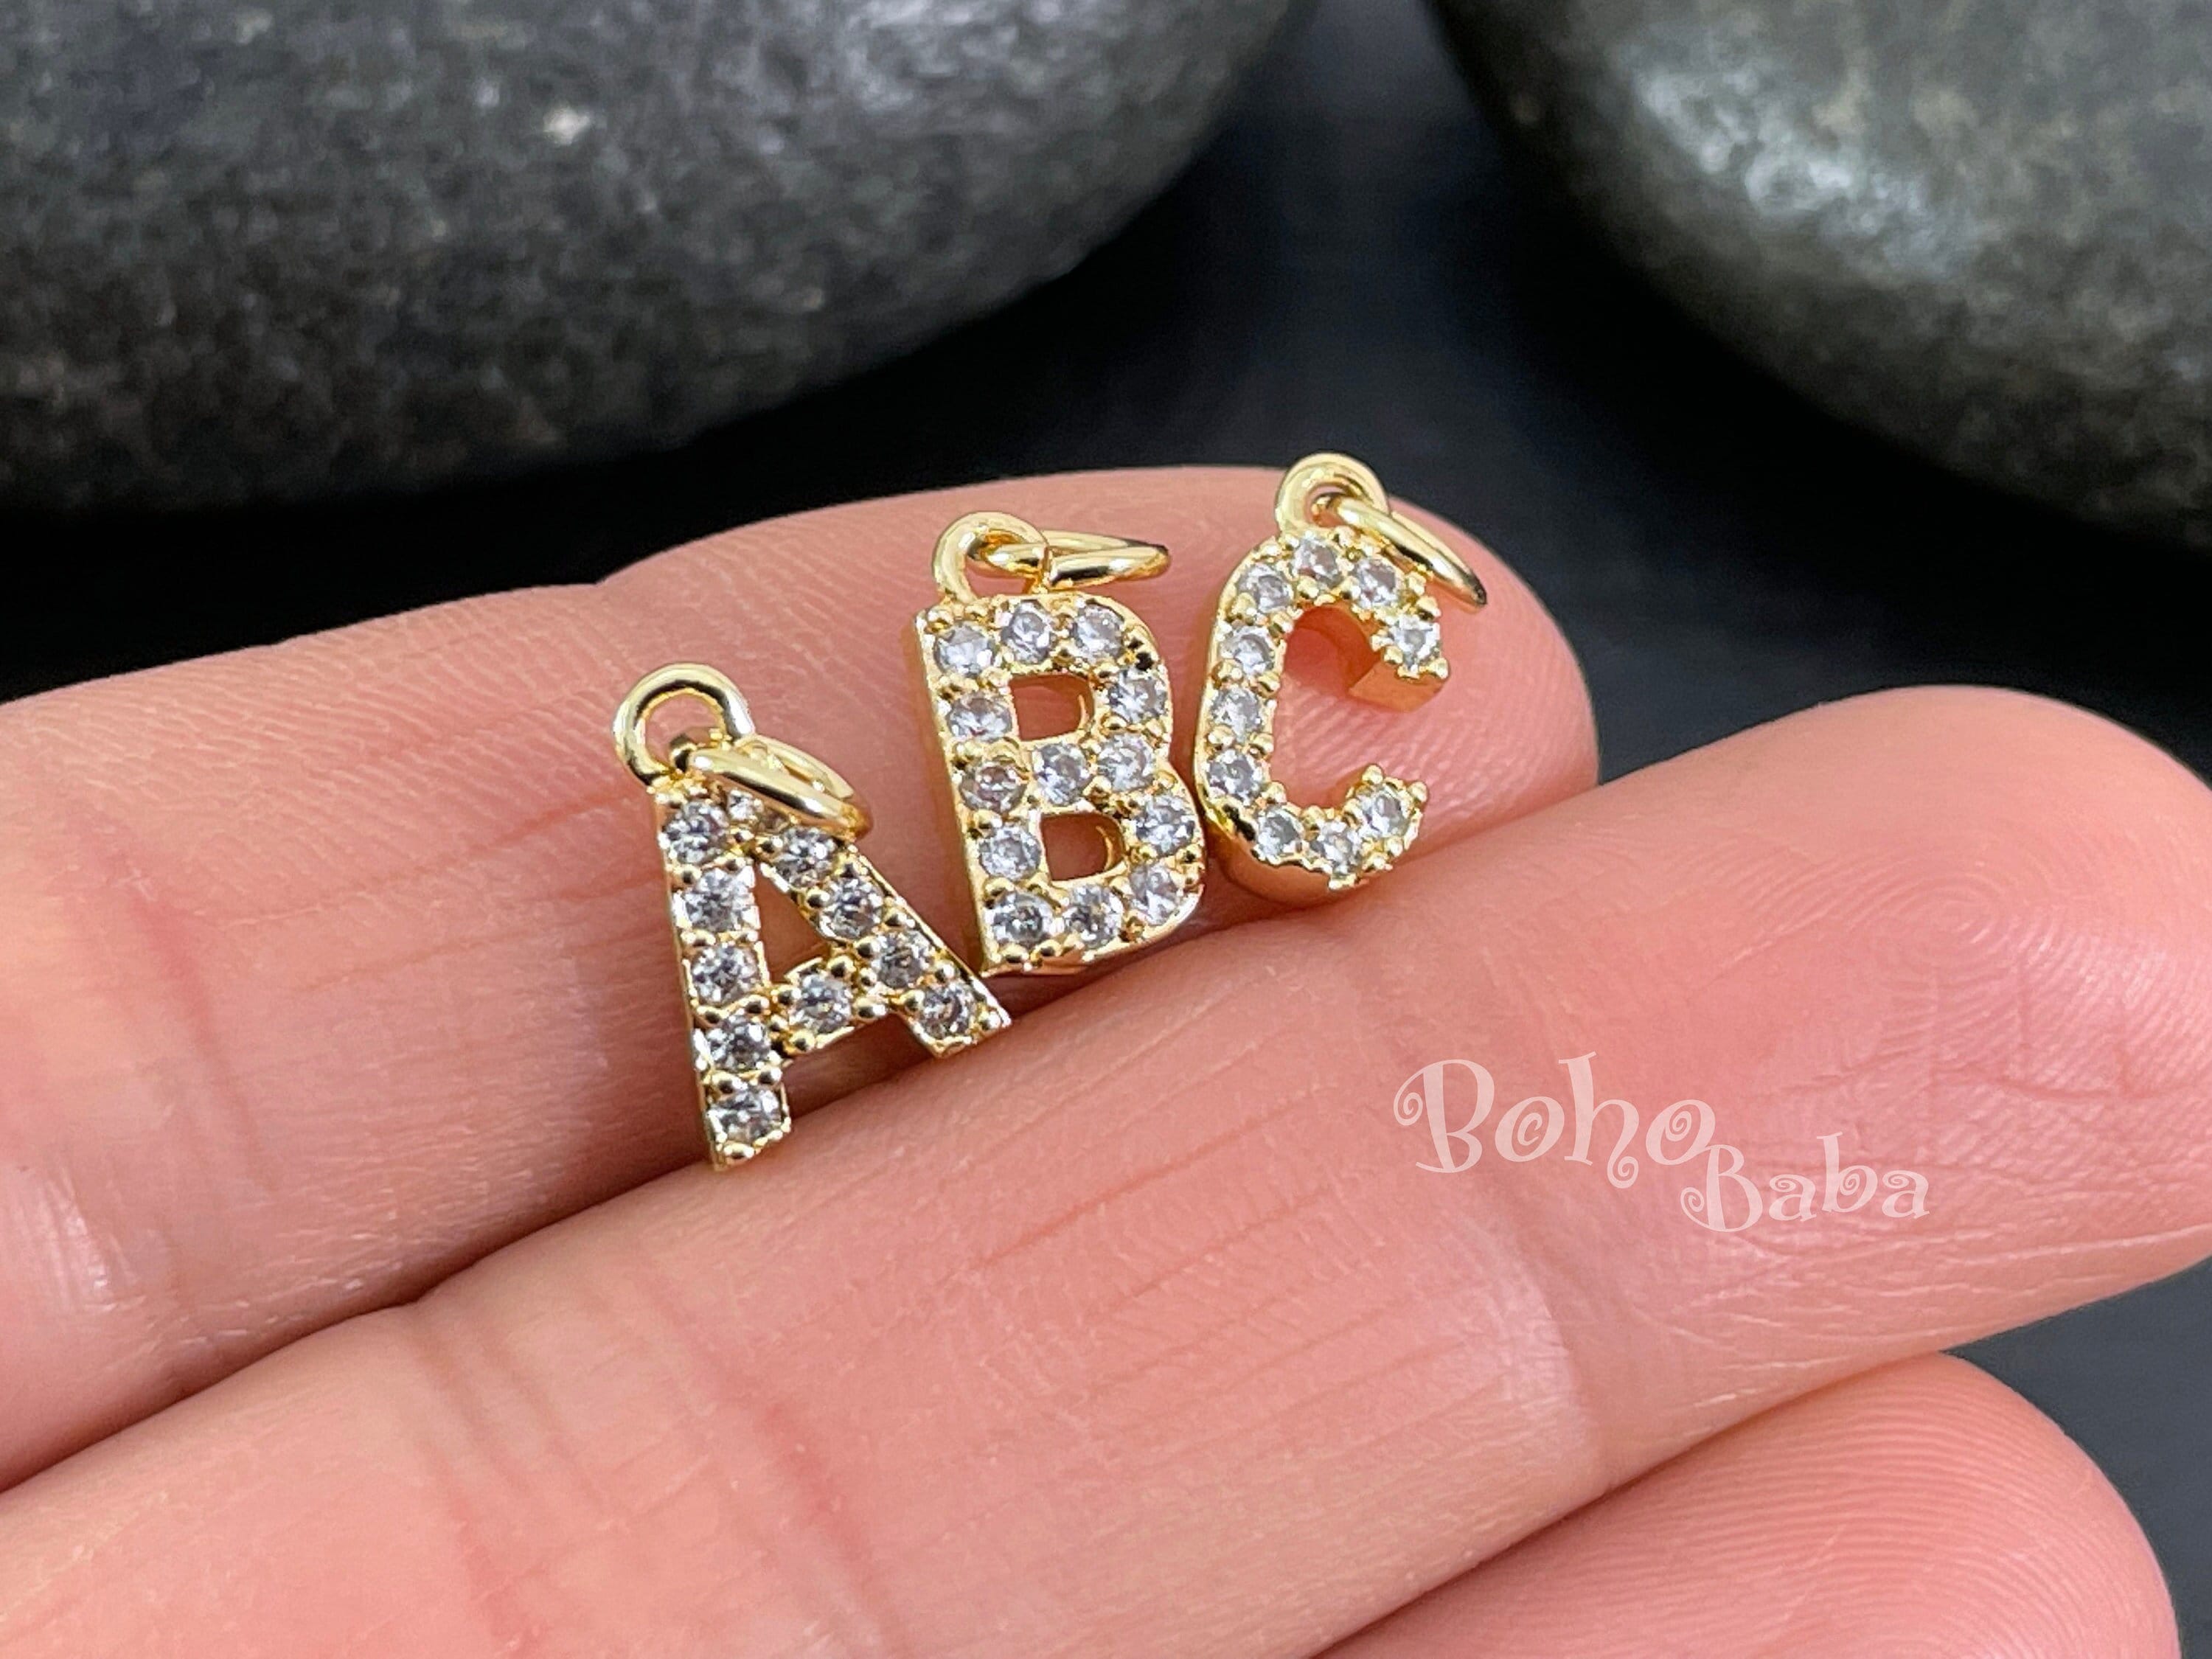 Pendant Stainless Steel Pave Set CZ Letter Charms Pdc9020 W Wholesale Jewelry Website Unisex